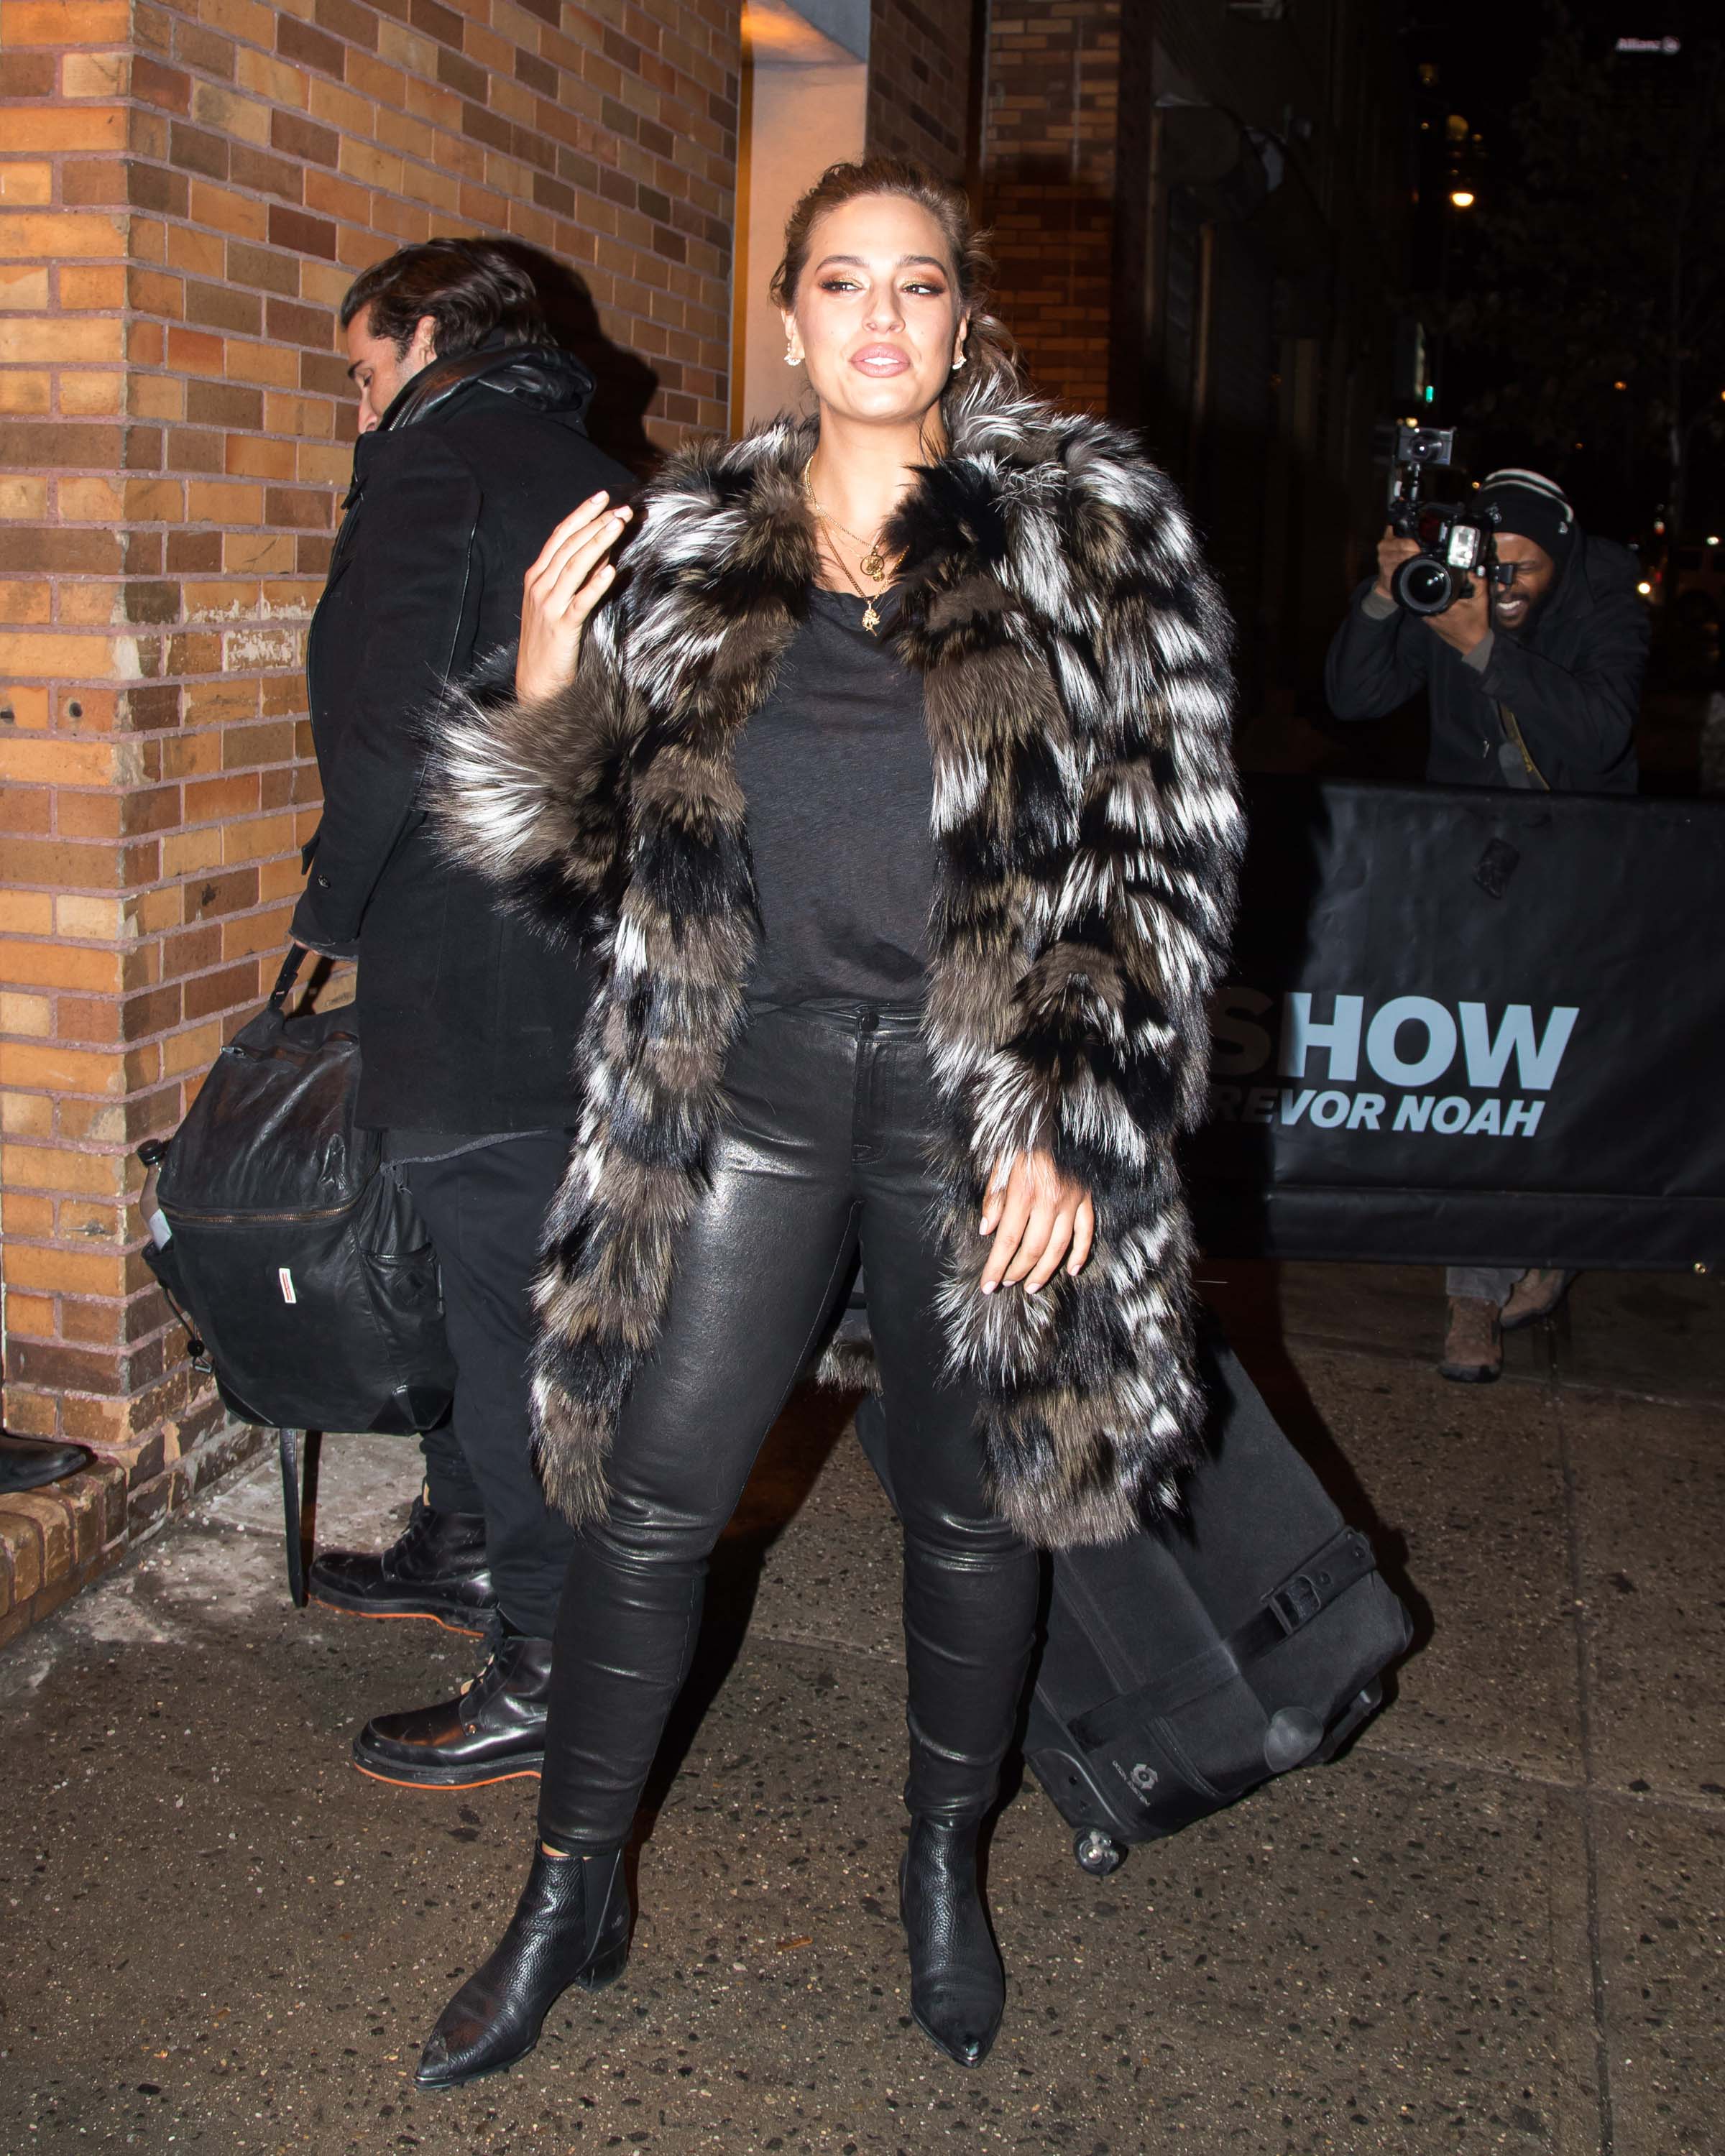 Ashley Graham is seen arriving at The Daily Show with Trevor Noah